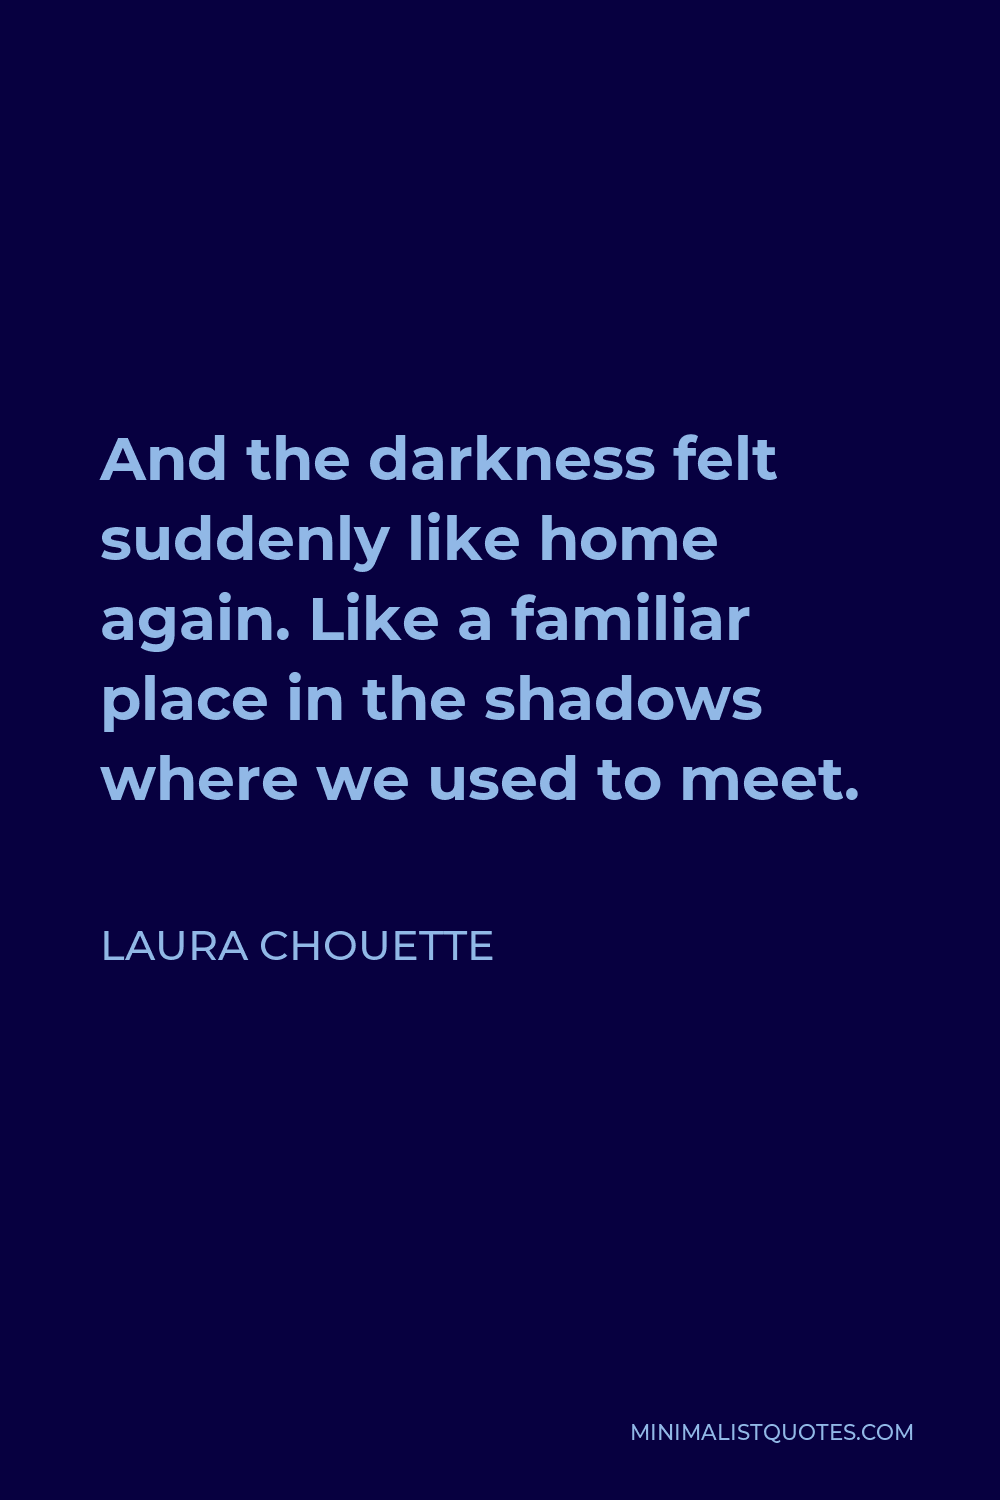 Laura Chouette Quote - And the darkness felt suddenly like home again. Like a familiar place in the shadows where we used to meet.